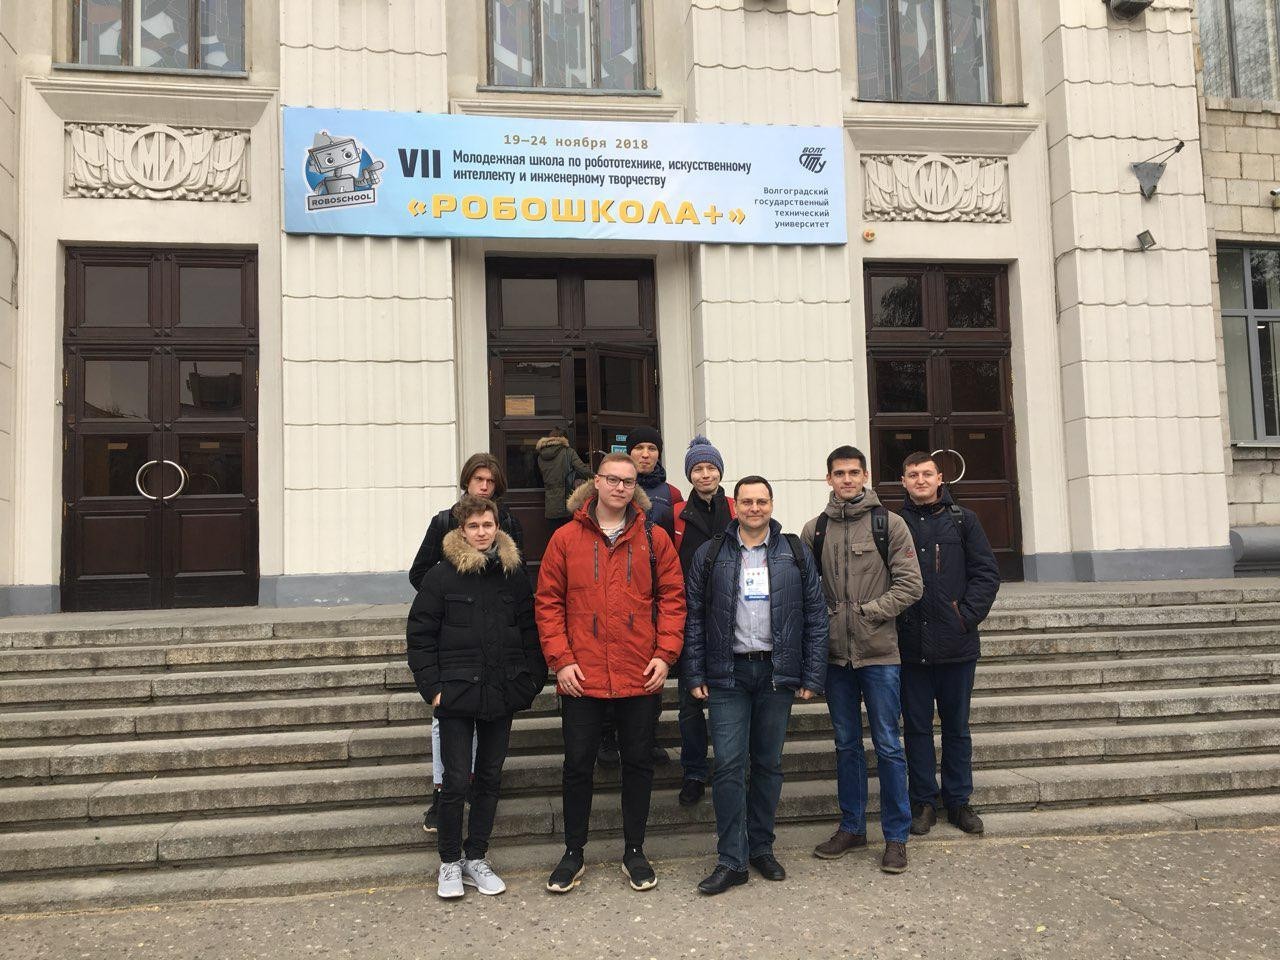 Students of the Laboratory of intelligent robotic systems participated at the VII Youth School on Robotics, Artificial Intelligence and Engineering Creativity 'Roboschool+' ,ITIS, LIRS, Roboschool